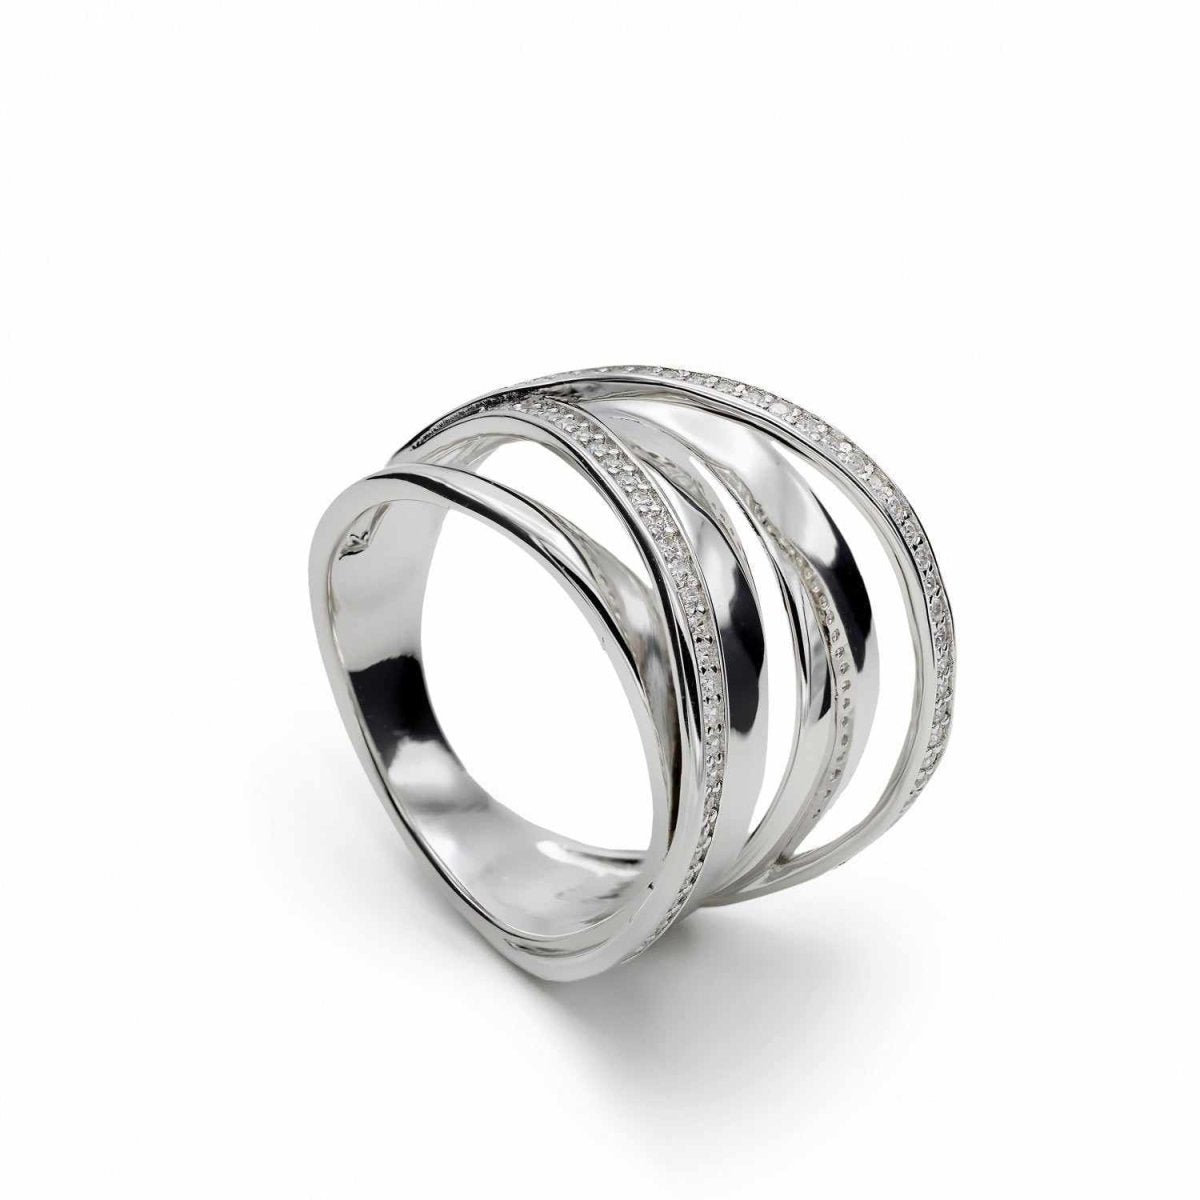 Ring - Multi-rail design wide rings with zirconias